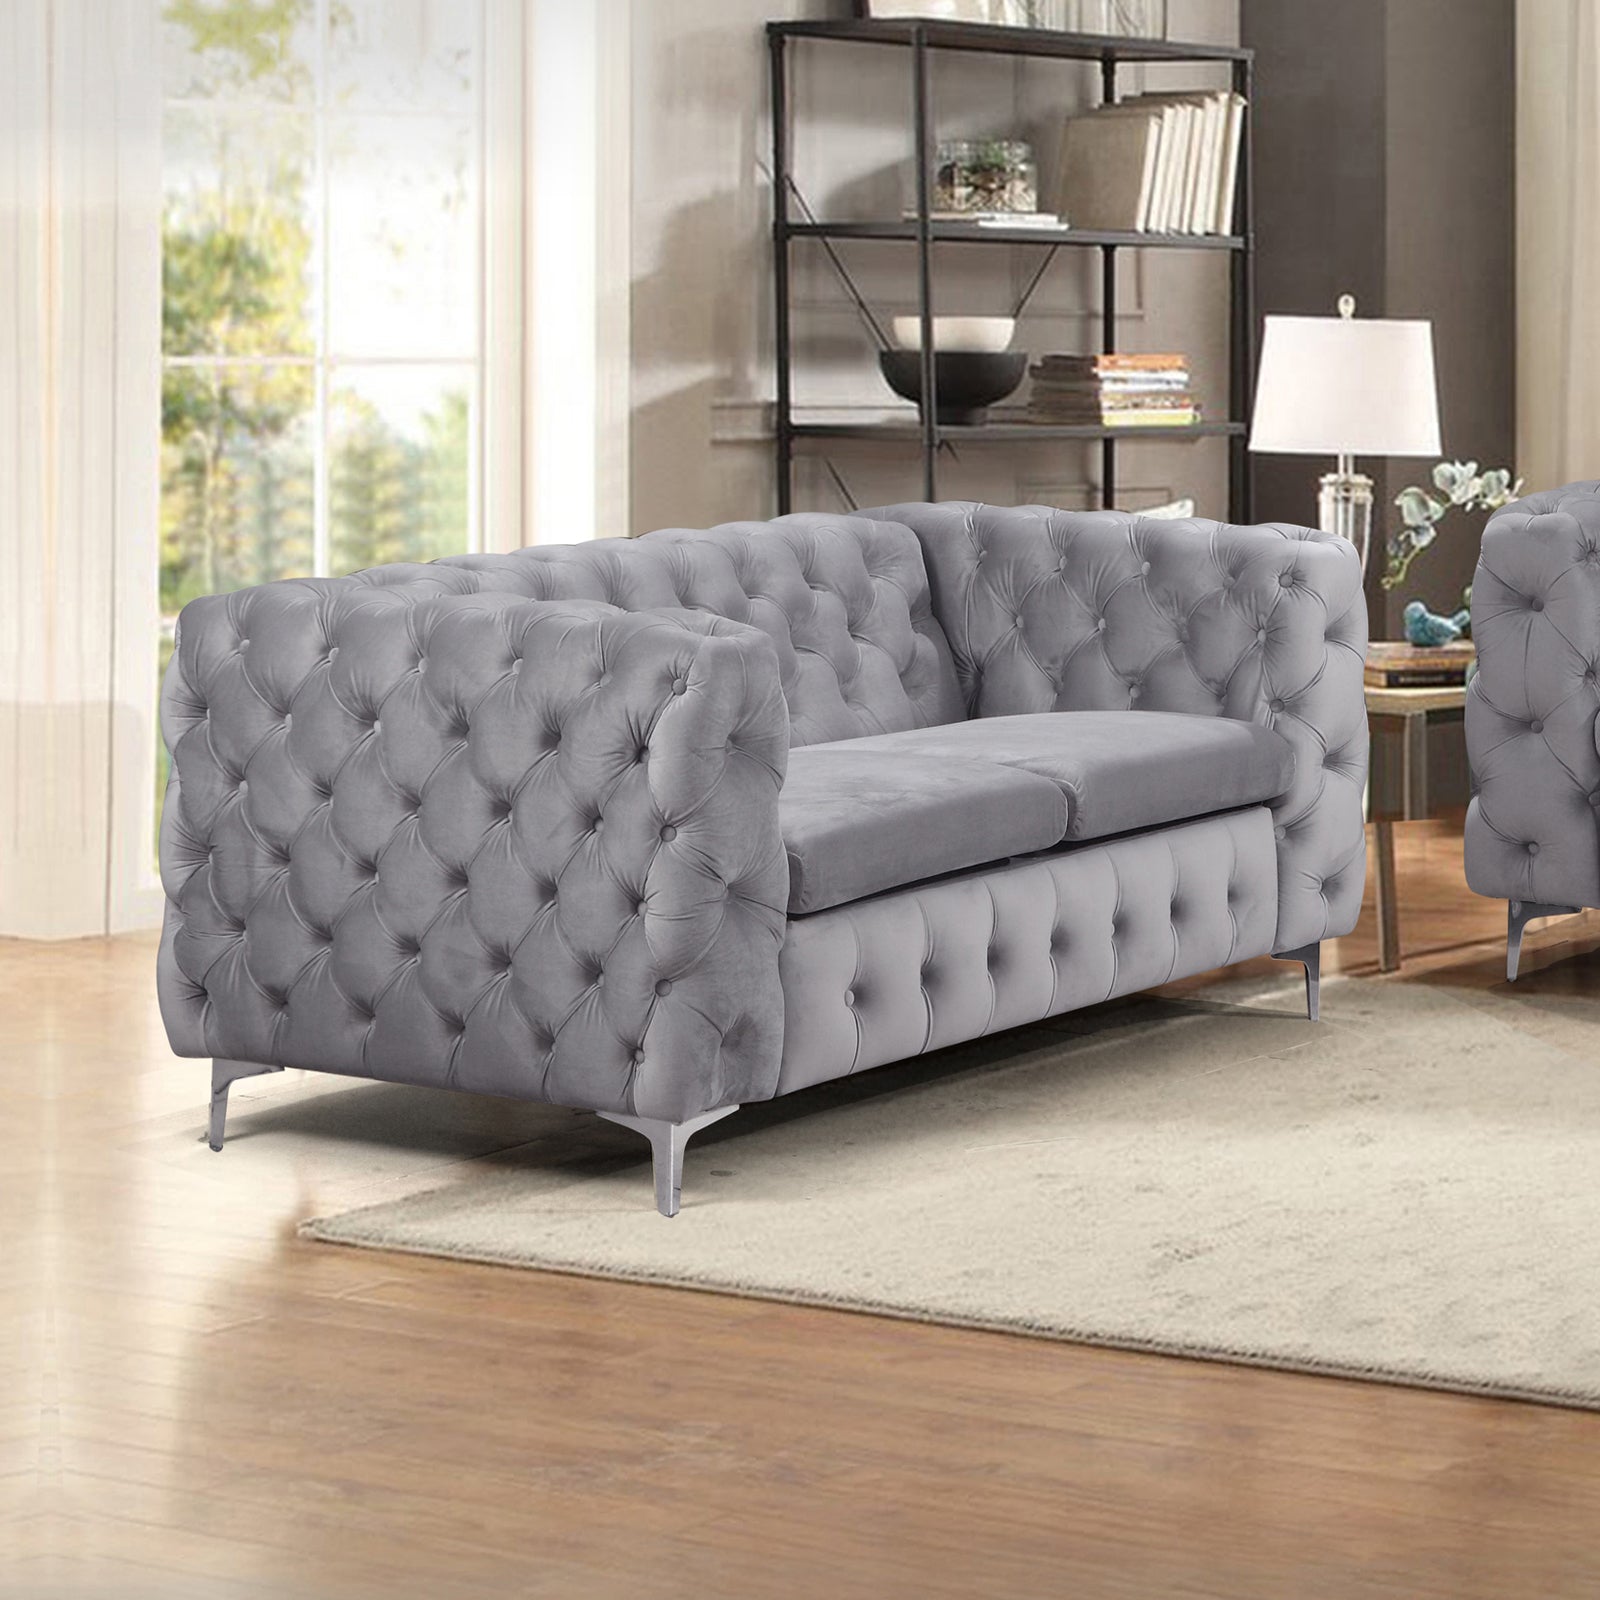 Jodie 2 Seater Grey Colour